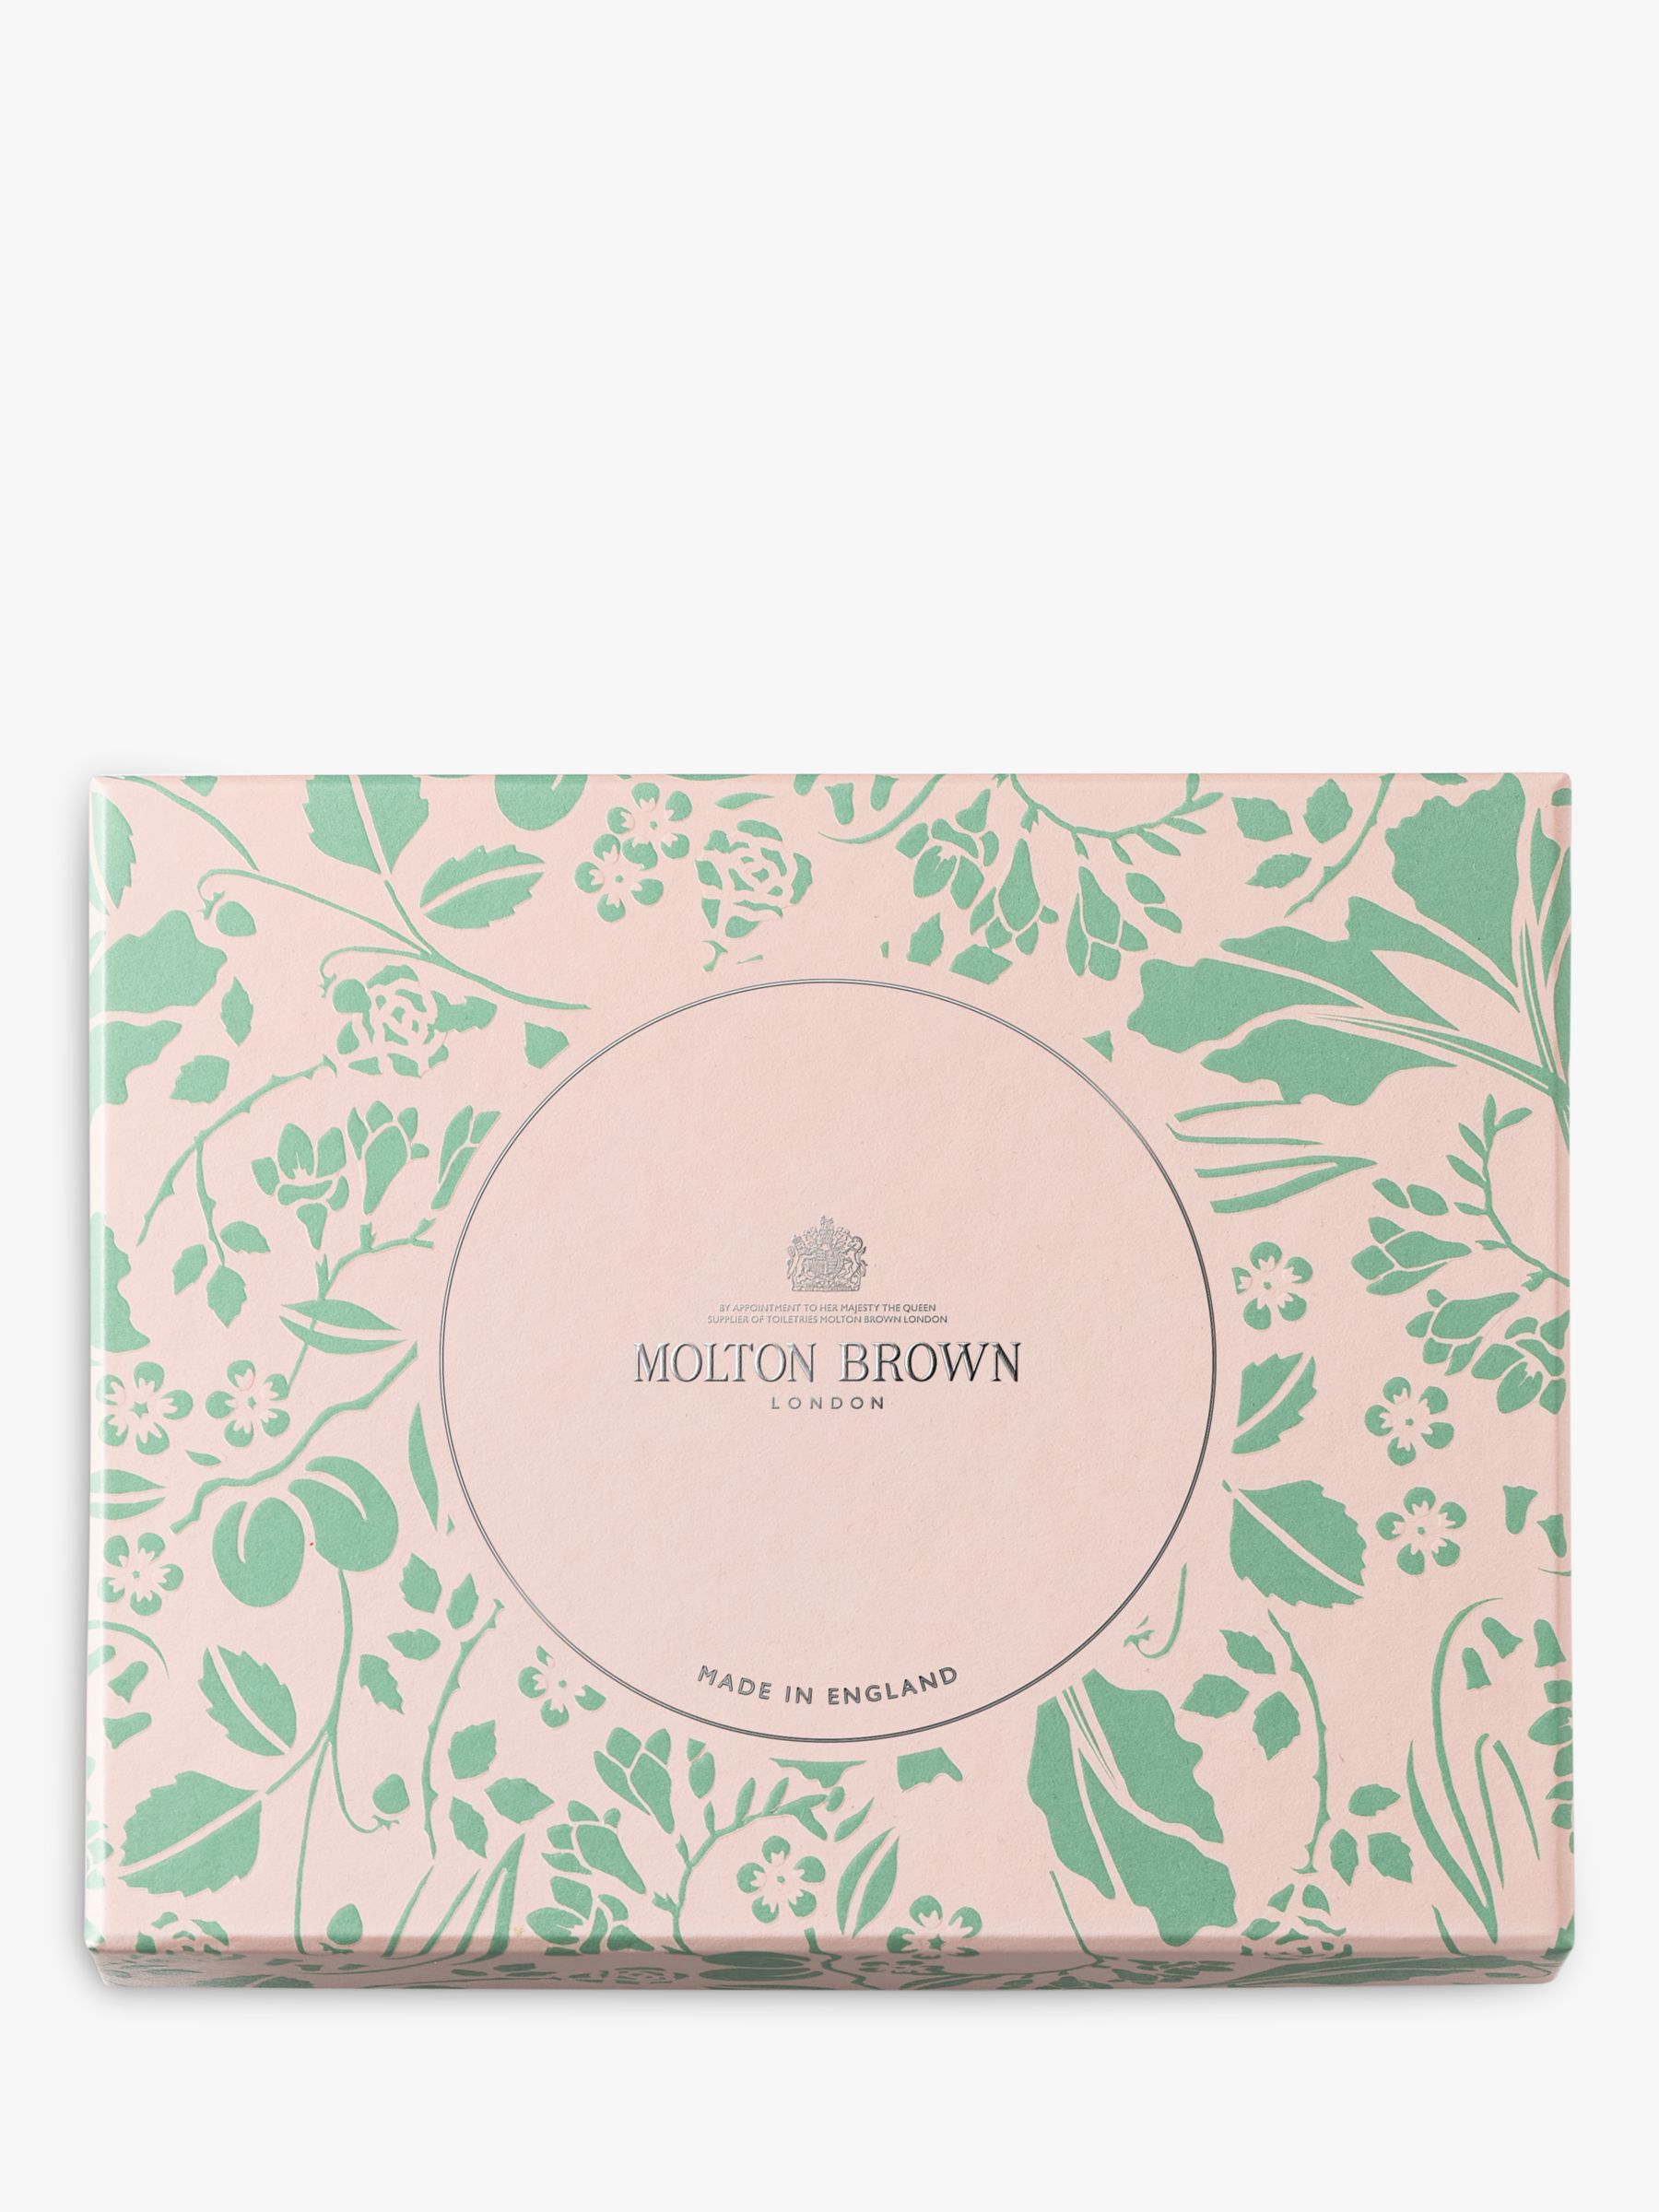 Molton Brown Delicious Rhubarb & Rose Travel Collection Bodycare Gift Set 2